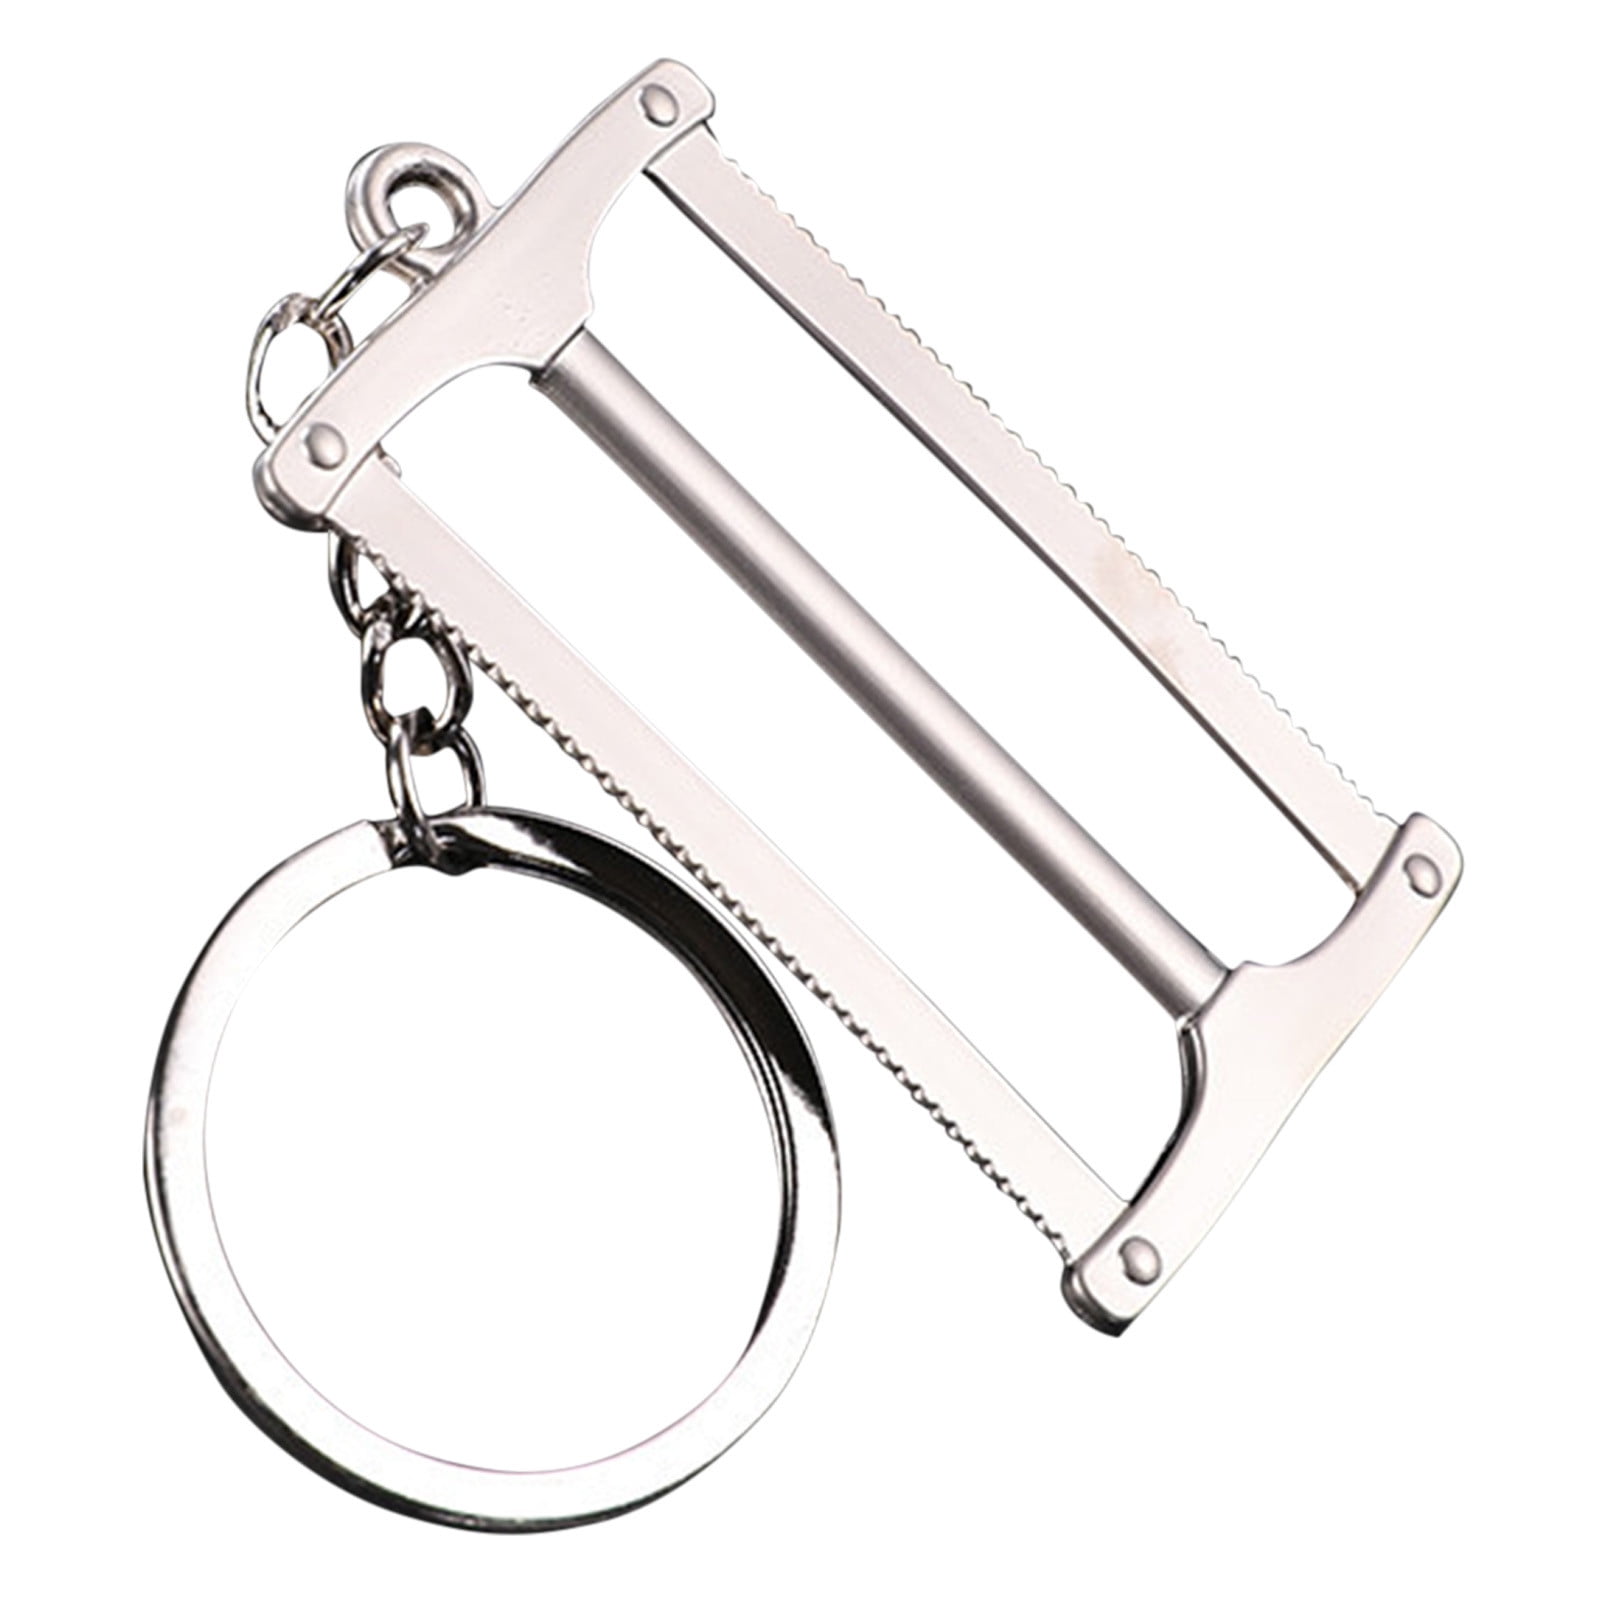 Teenitor 120pcs Key Chain Rings Keychain Rings 1inch, Keychain Making Supplies, Key Chain, Key Chain Rings for Crafts, Key, Car 120 Key Rings and